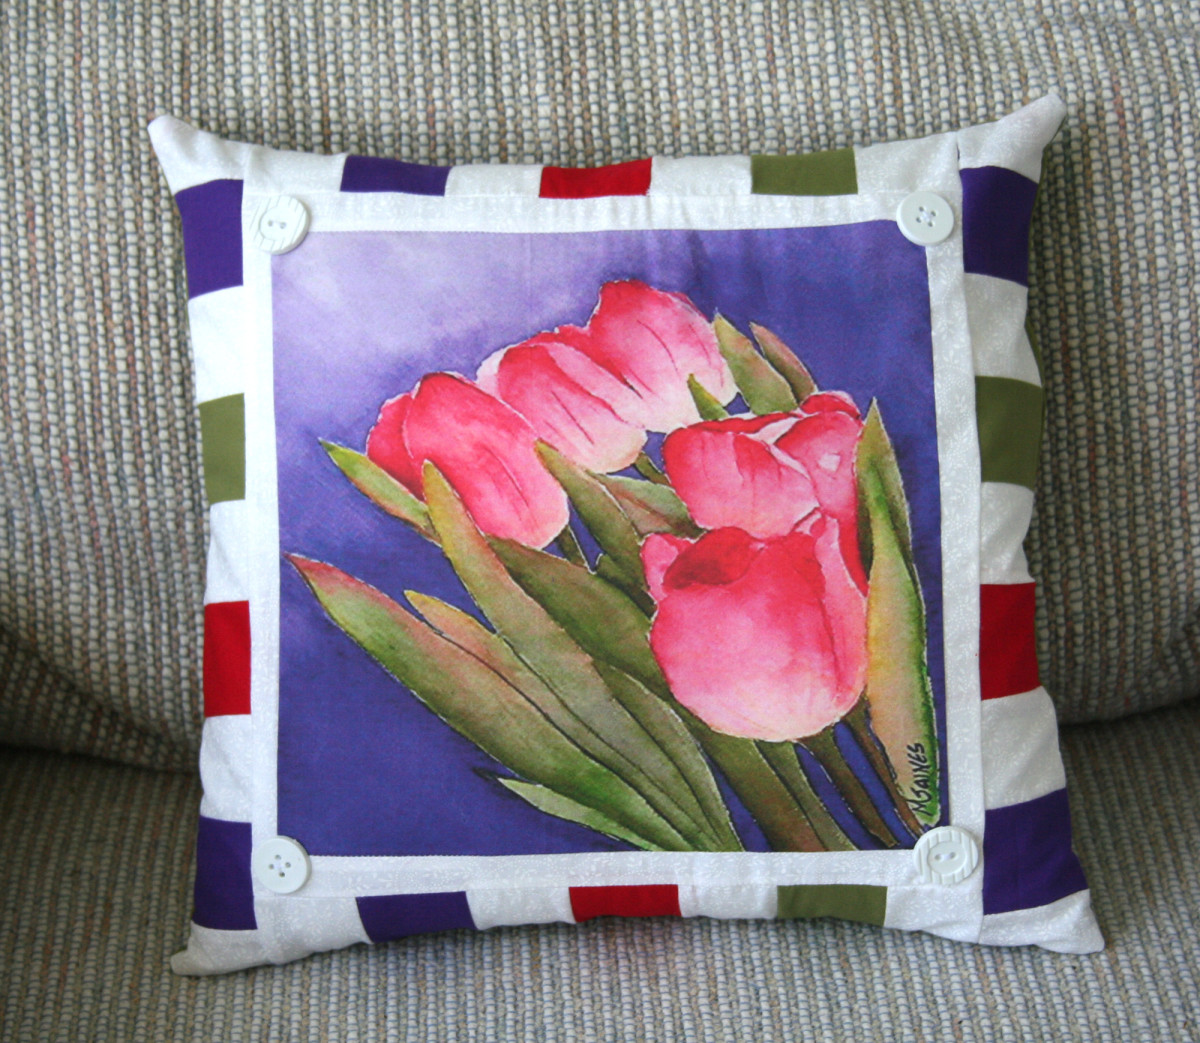 My watercolor tulips on throw pillow.